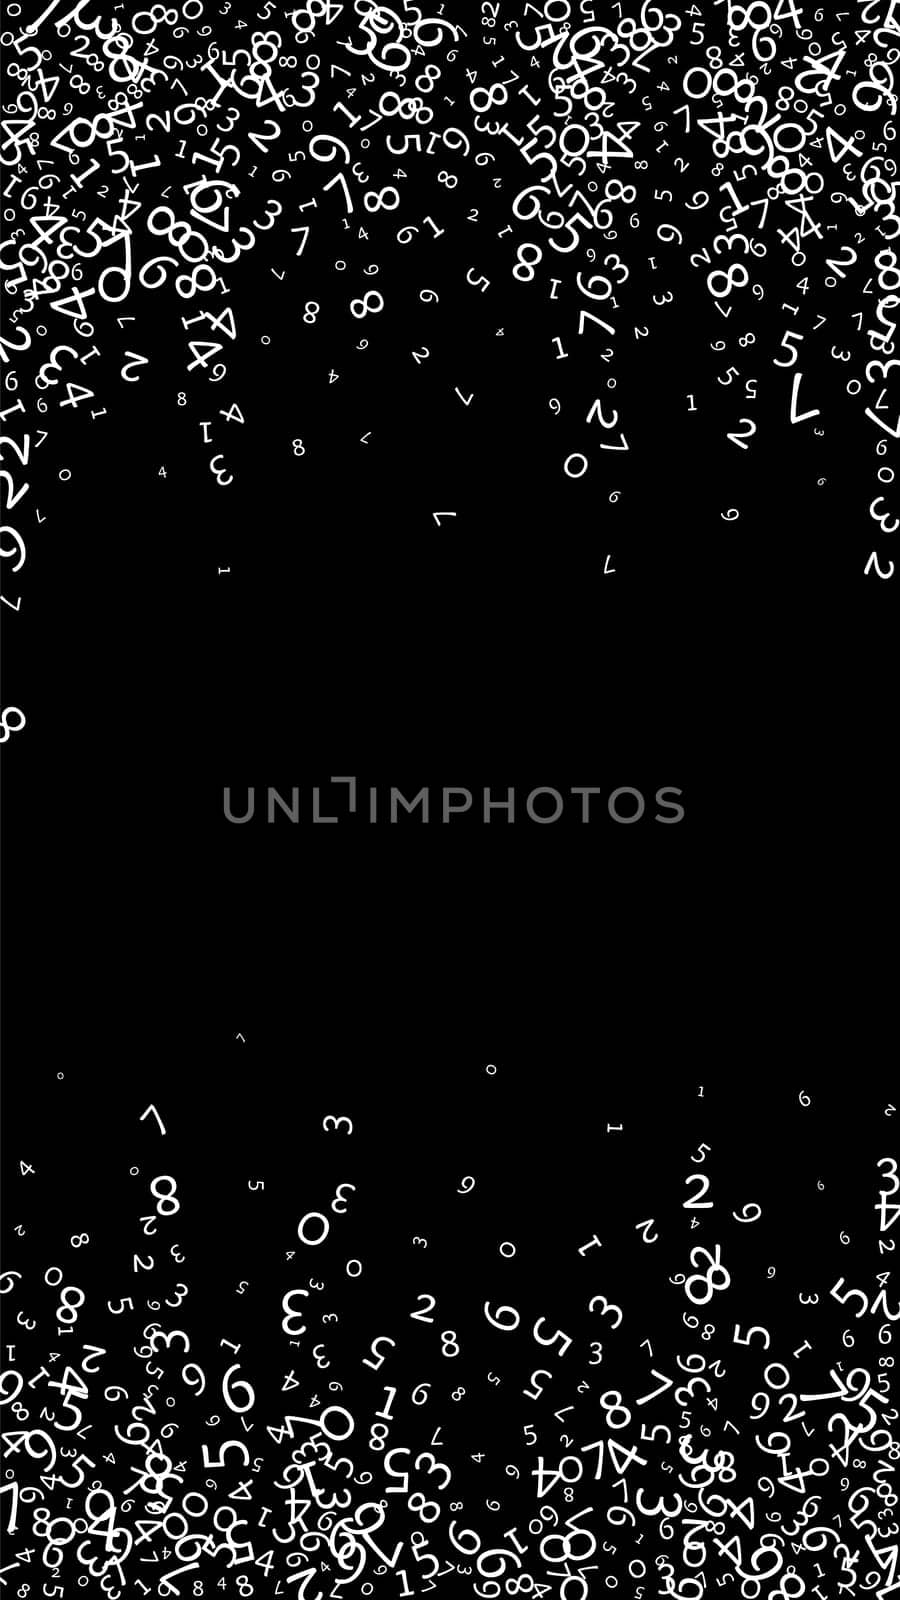 Falling numbers, big data concept. Binary white messy flying digits. Favorable futuristic banner on black background. Digital illustration with falling numbers. by beginagain